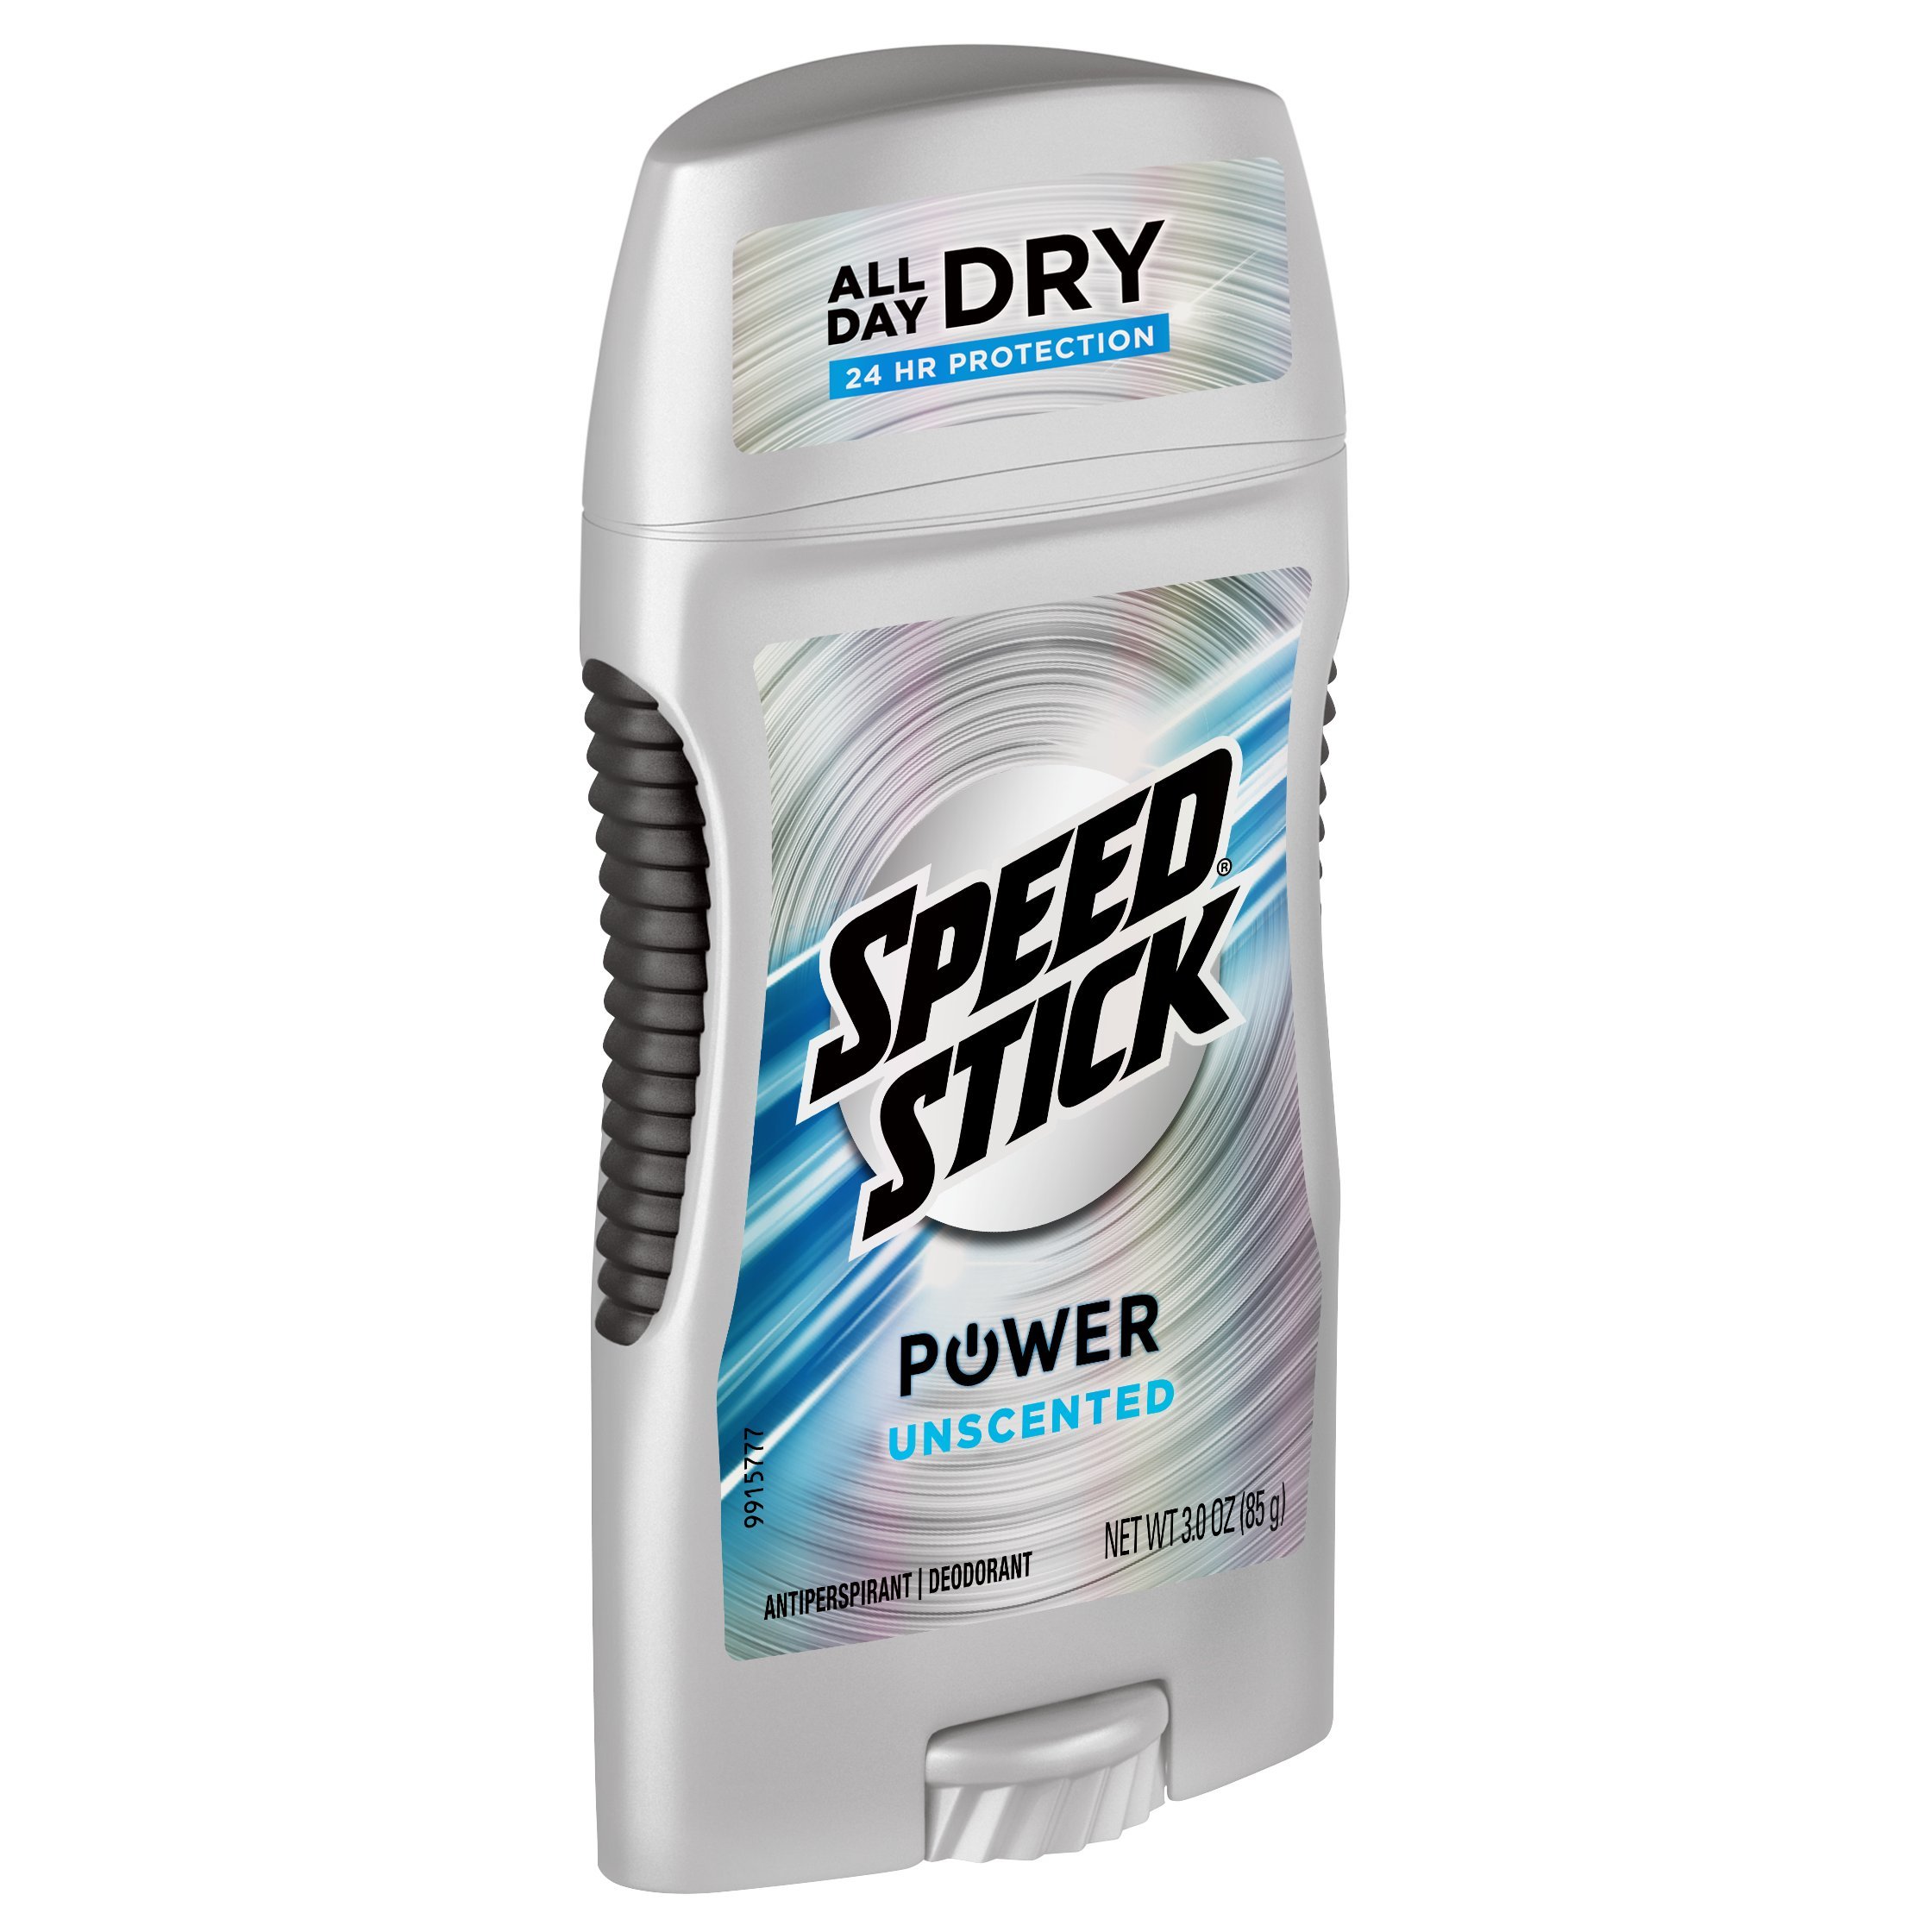 Speed Stick Power Antiperspirant Deodorant for Men, Unscented - 3 Ounce, Pack Of 6 (Packaging May Vary)